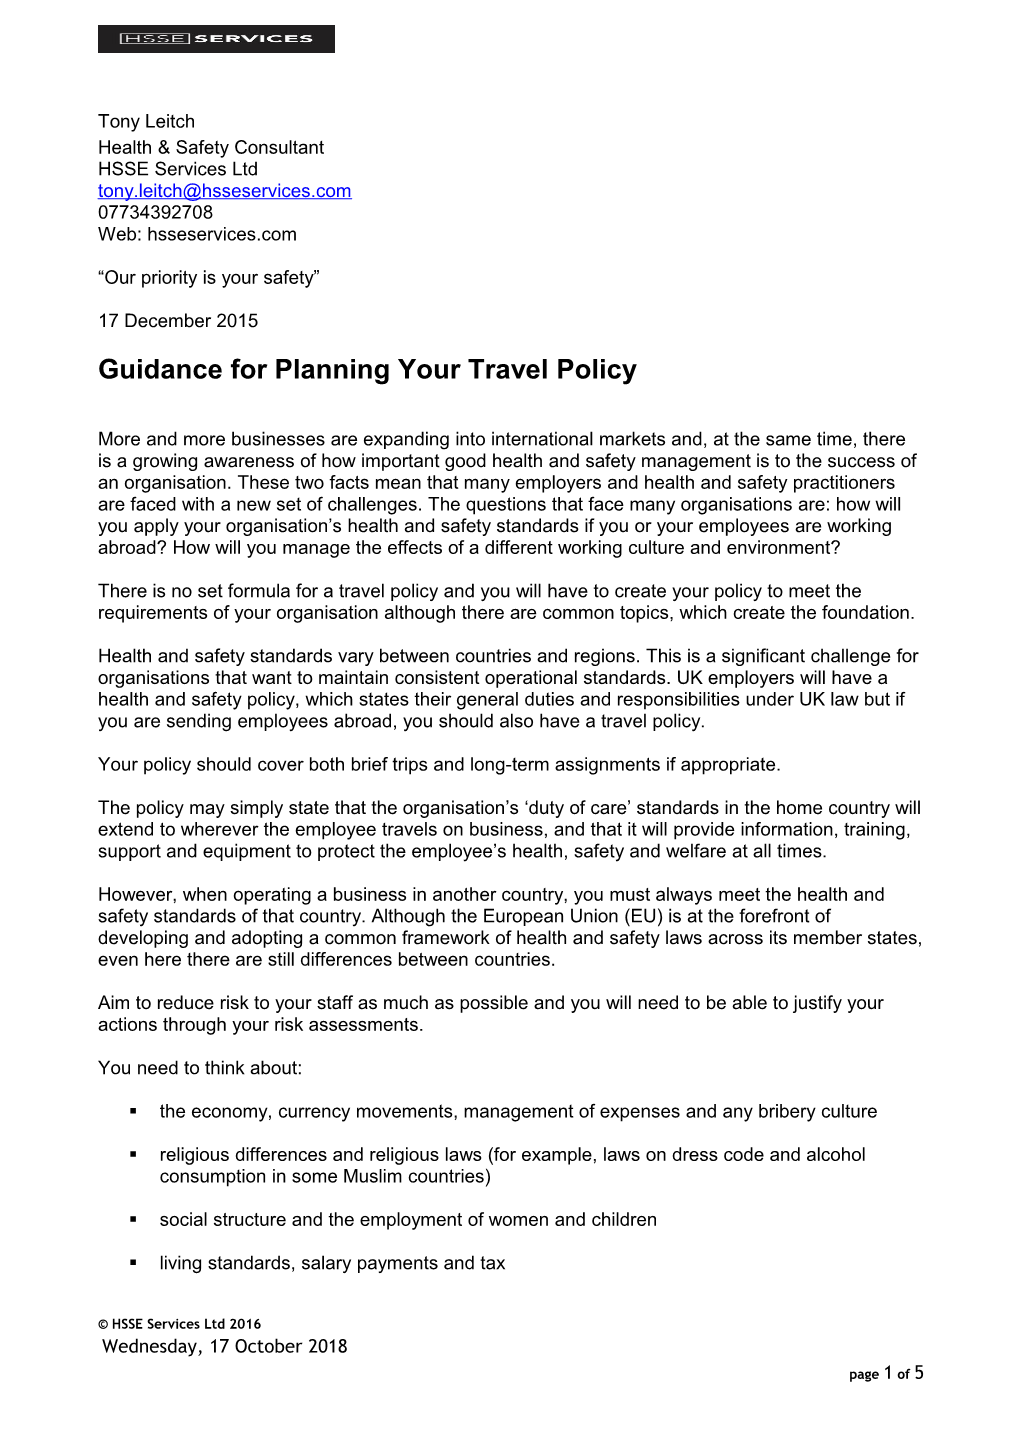 Guidance for Planning Your Travel Policy